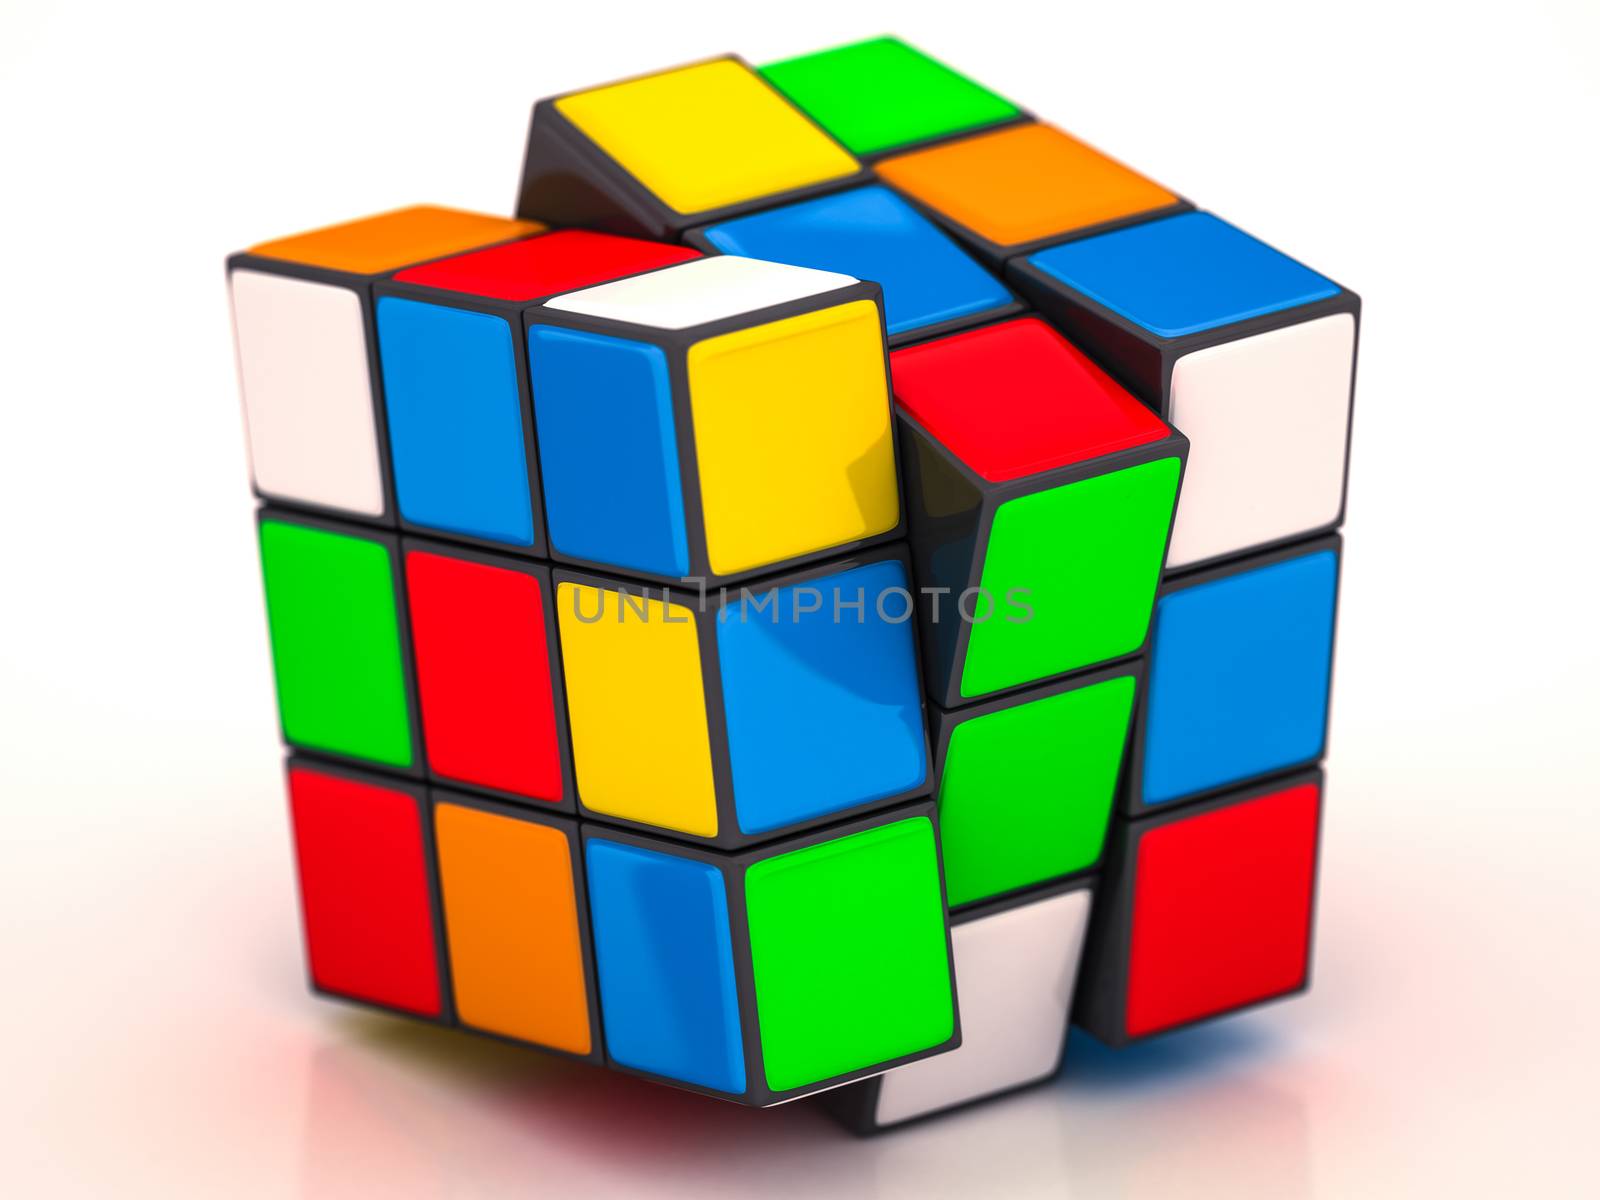 Rubik's Cube by Lupen